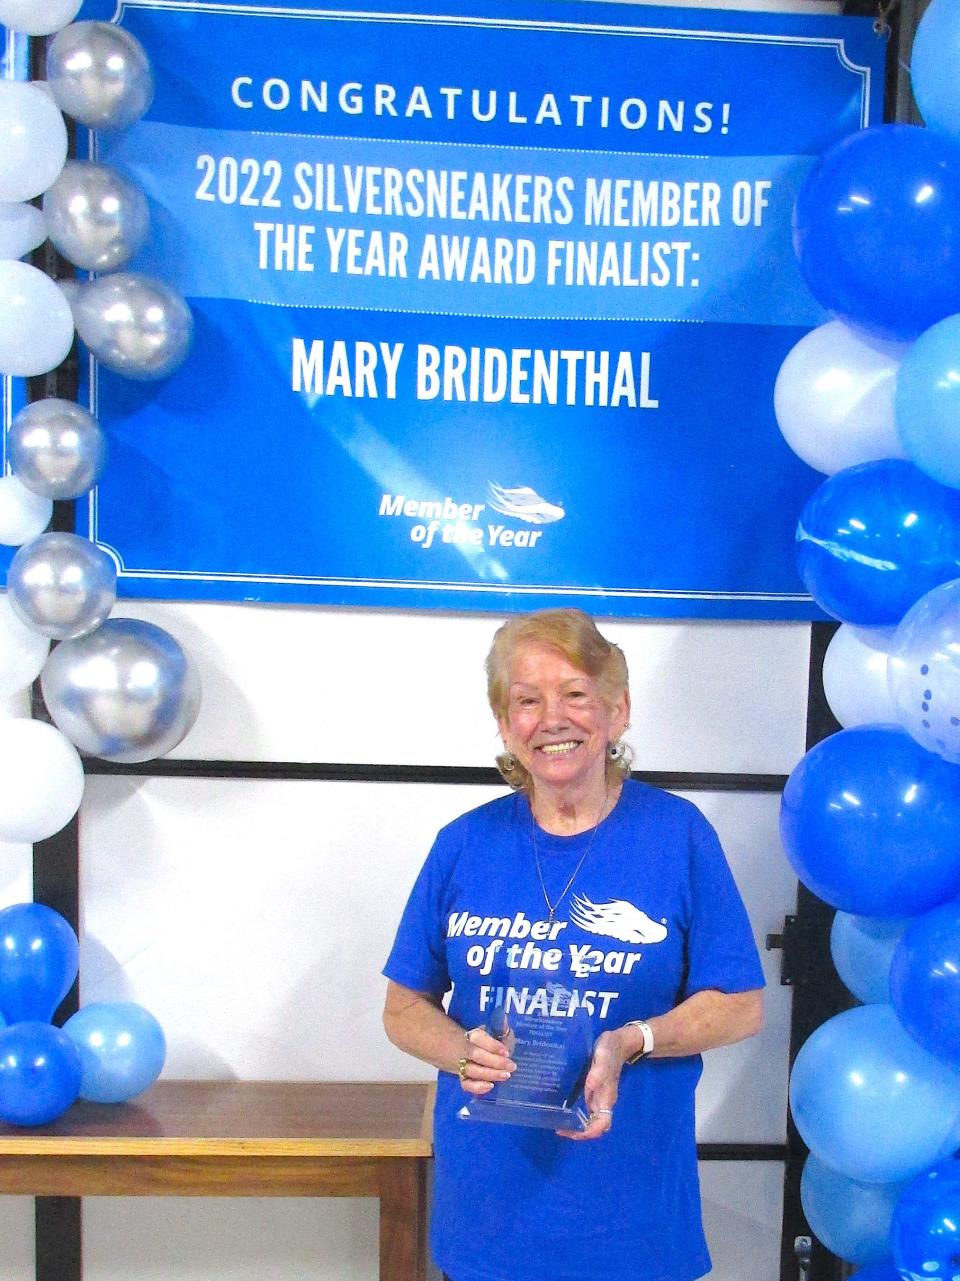 Mary Bridenthal was a finalist for the 2022 Silver Sneakers Member of the Year.